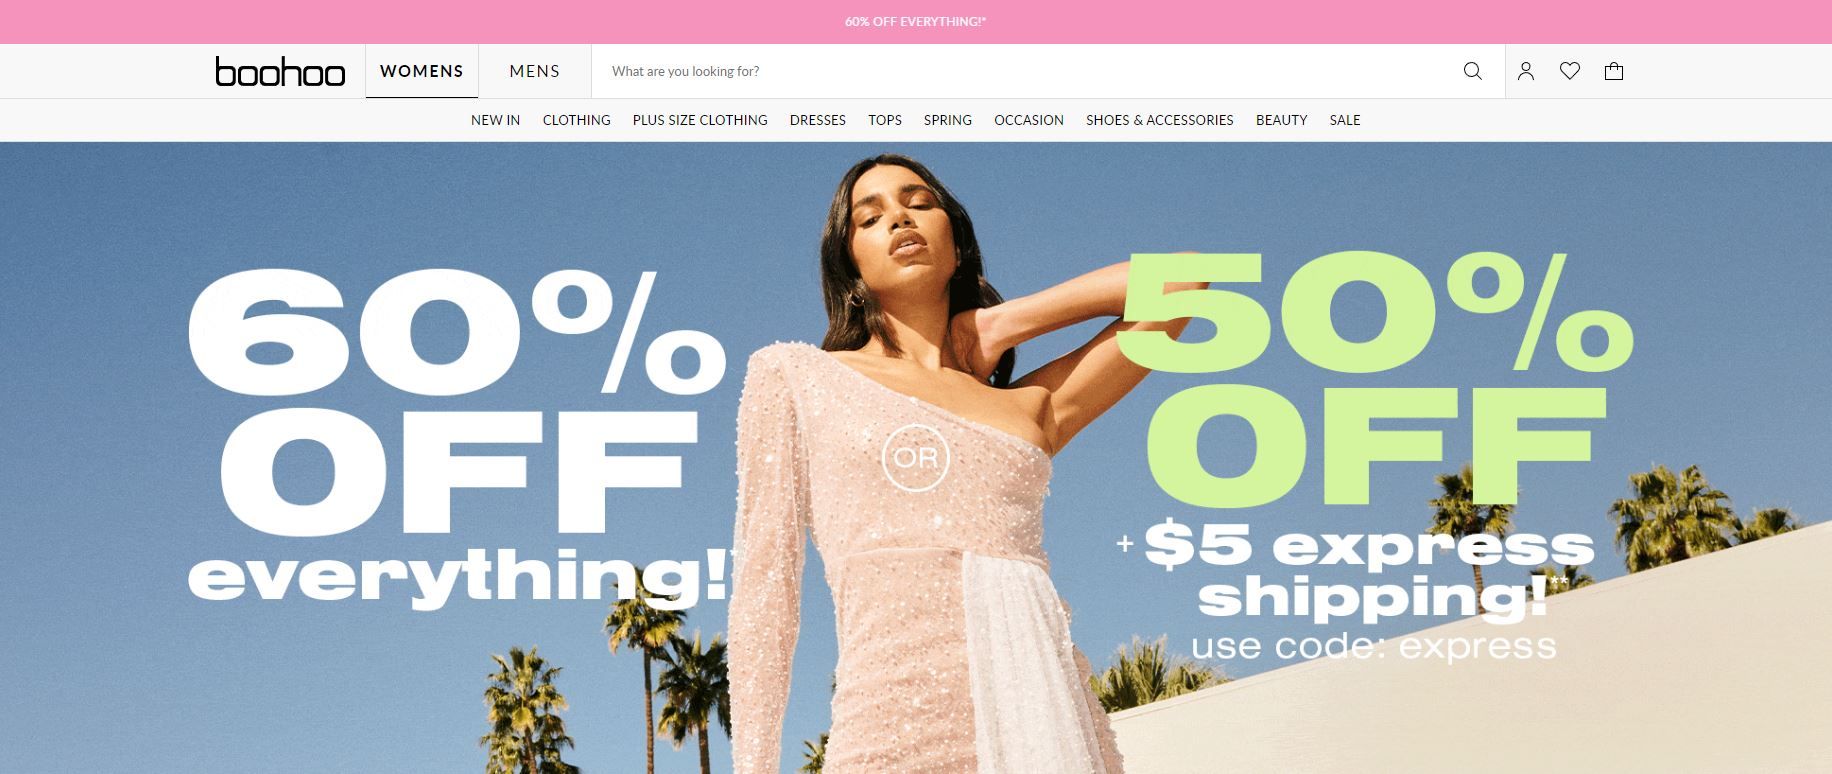 Trendy And Affordable Websites That Are An Alternative To Shein